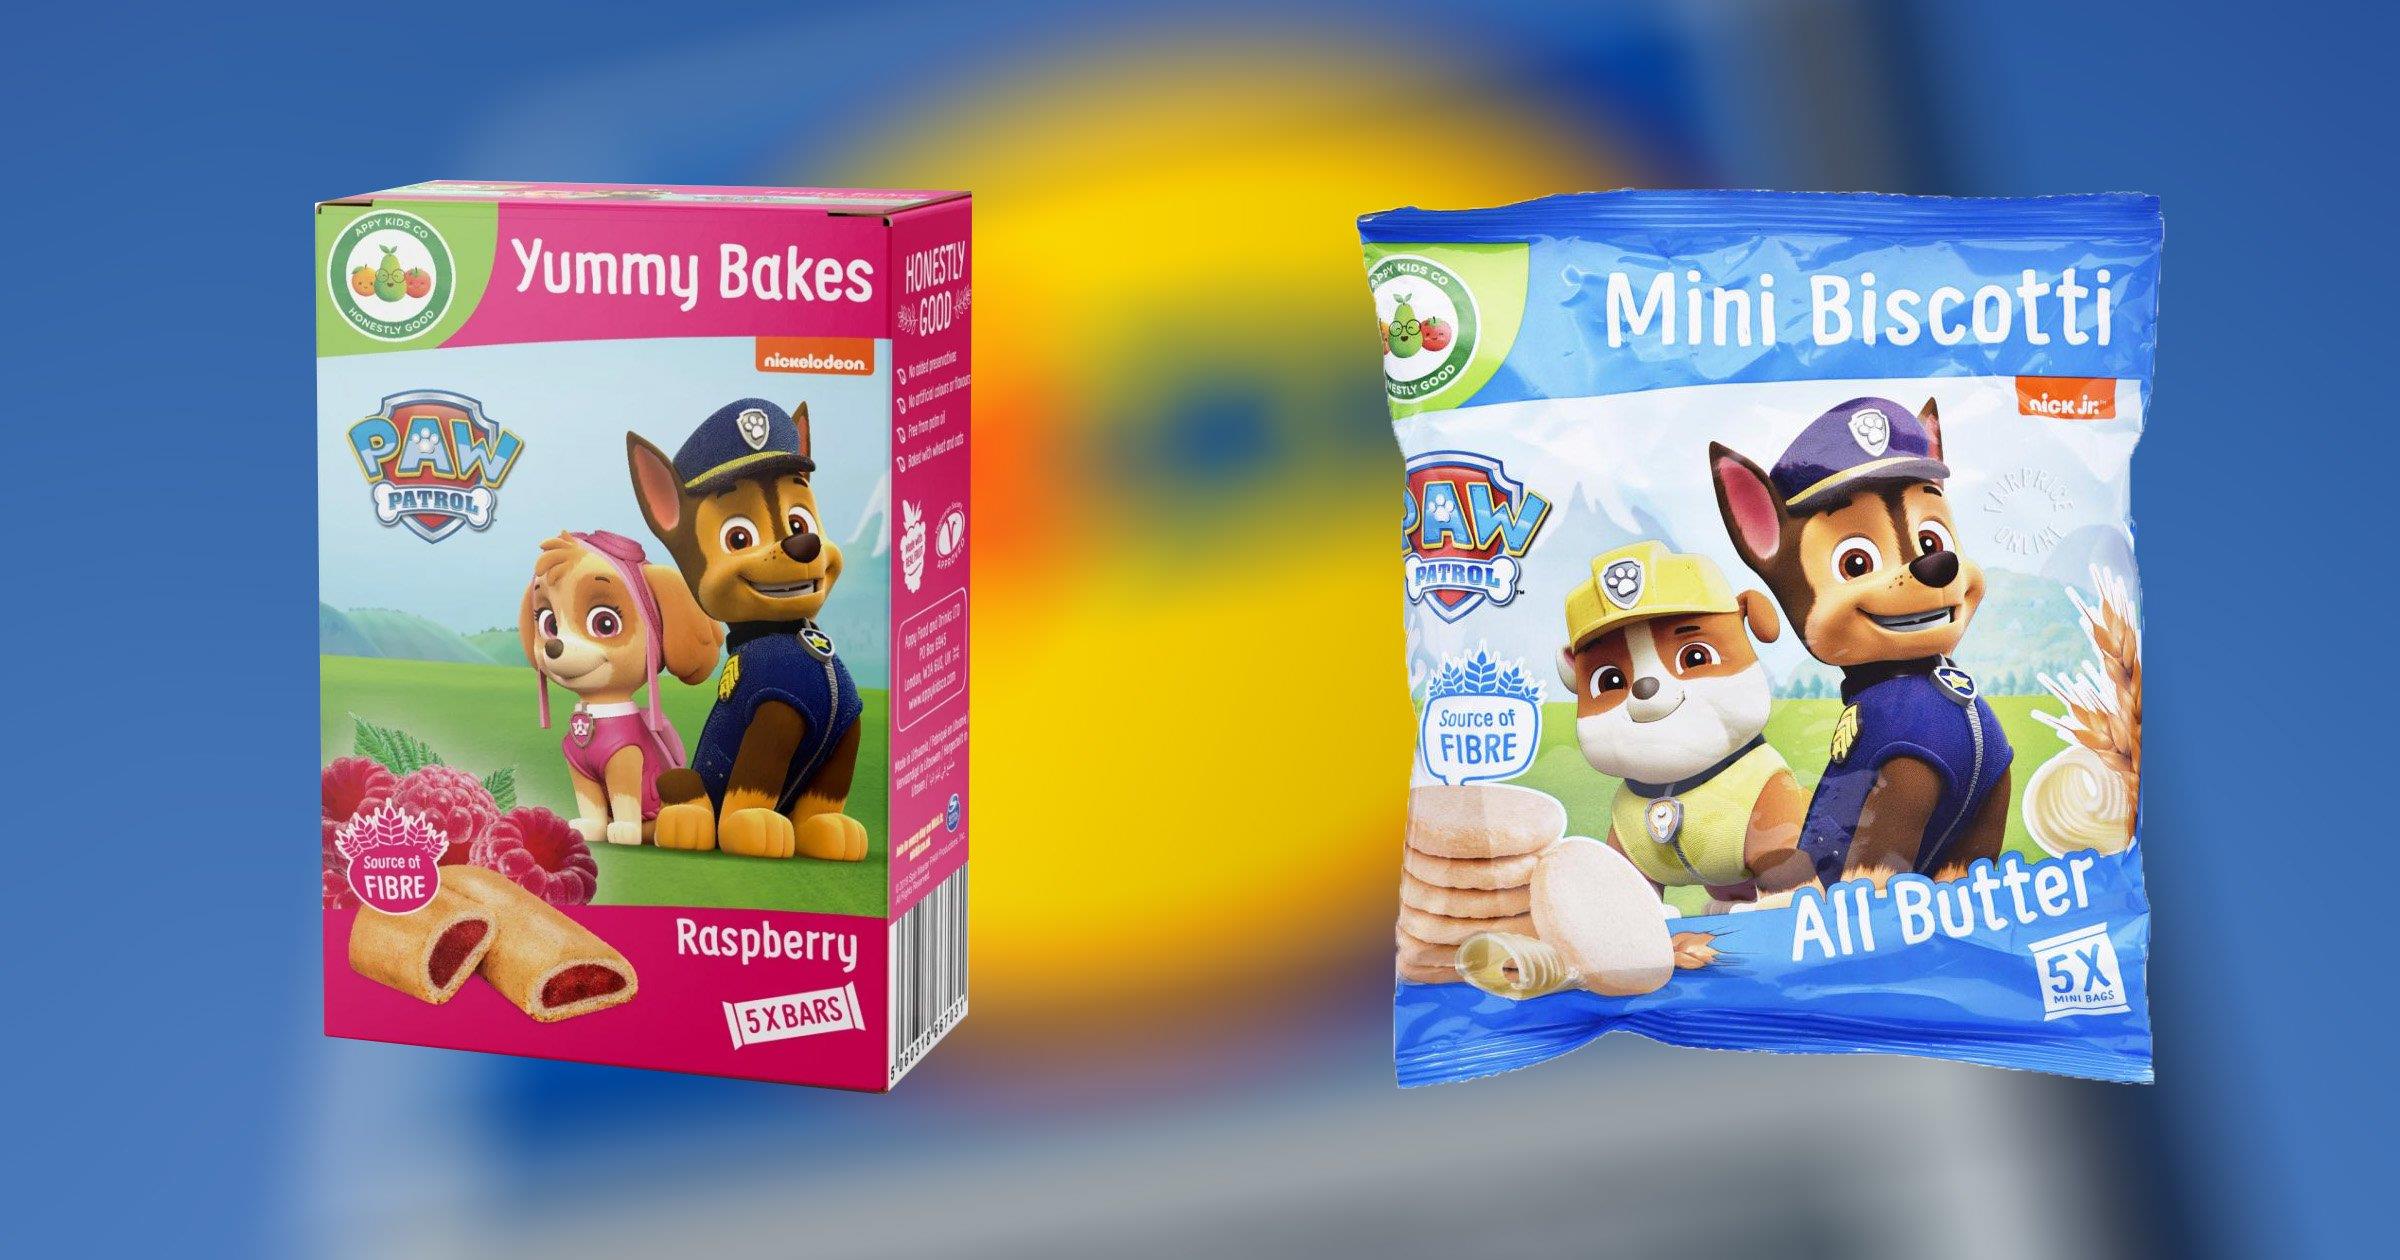 lidl-recalls-paw-patrol-snacks-due-to-inappropriate-website-display